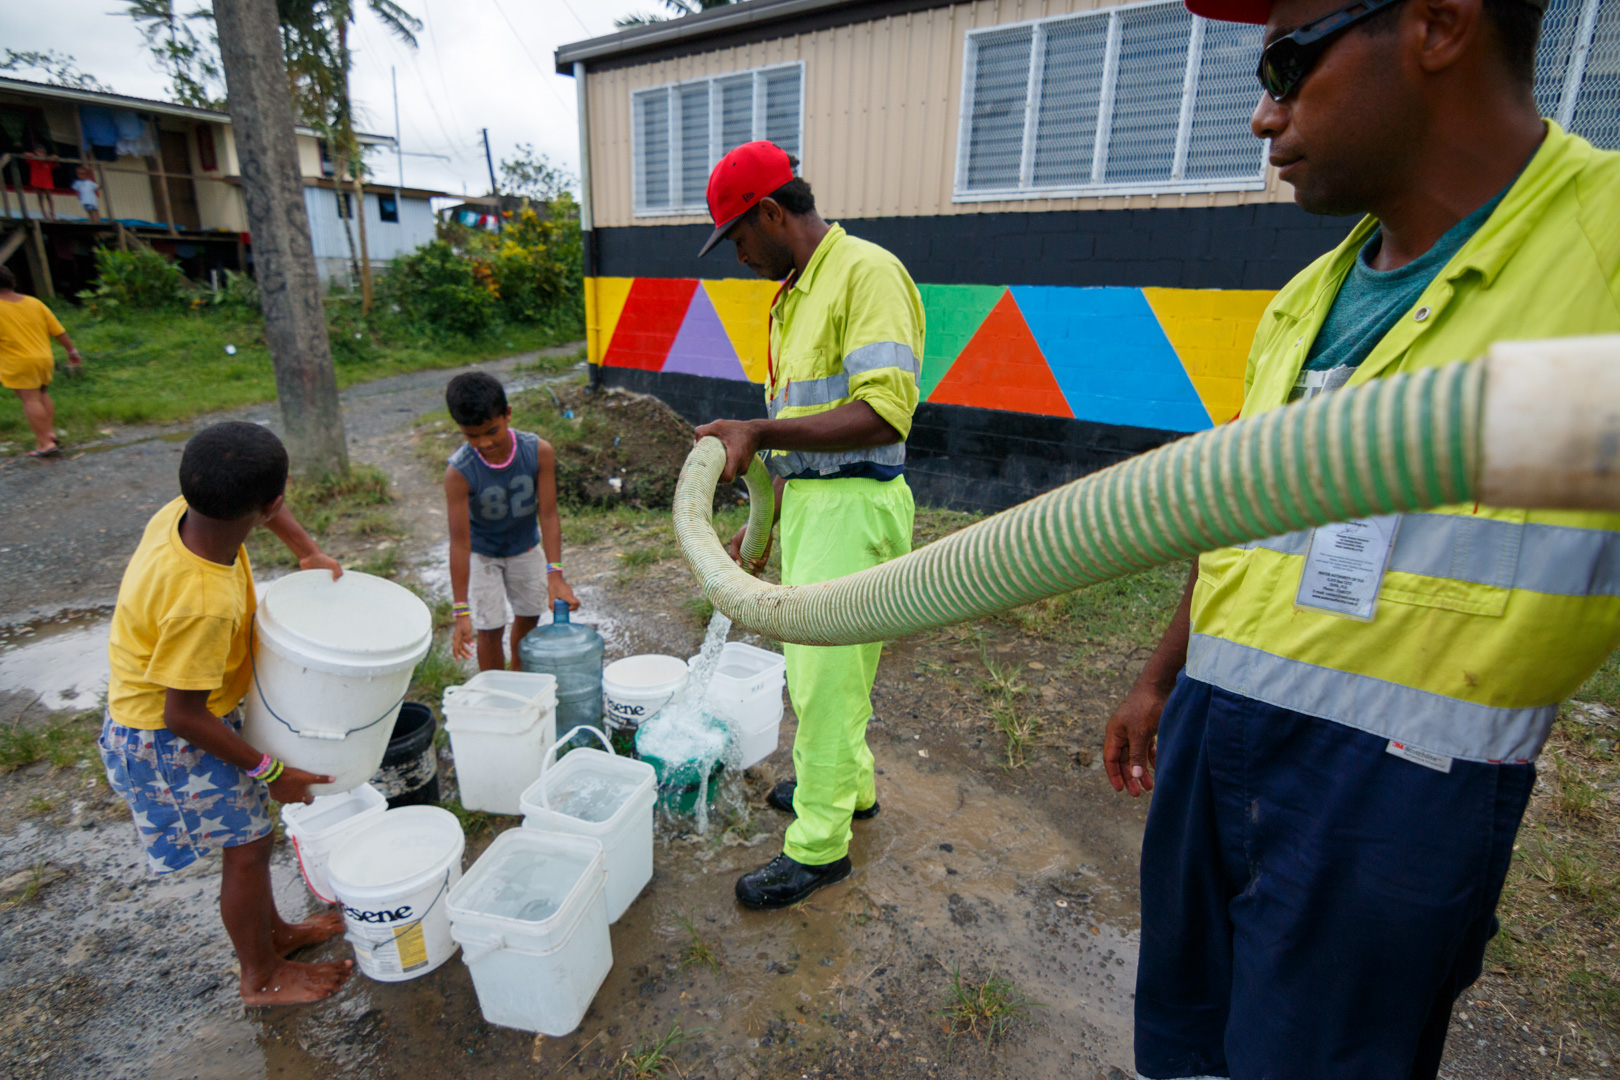  Workers from Suva's City Council fills residents' buckets with fresh water after power outages caused by Cyclone Winston stopped the pumps from working throughout Fiji's capital Suva, February 23, 2016. 